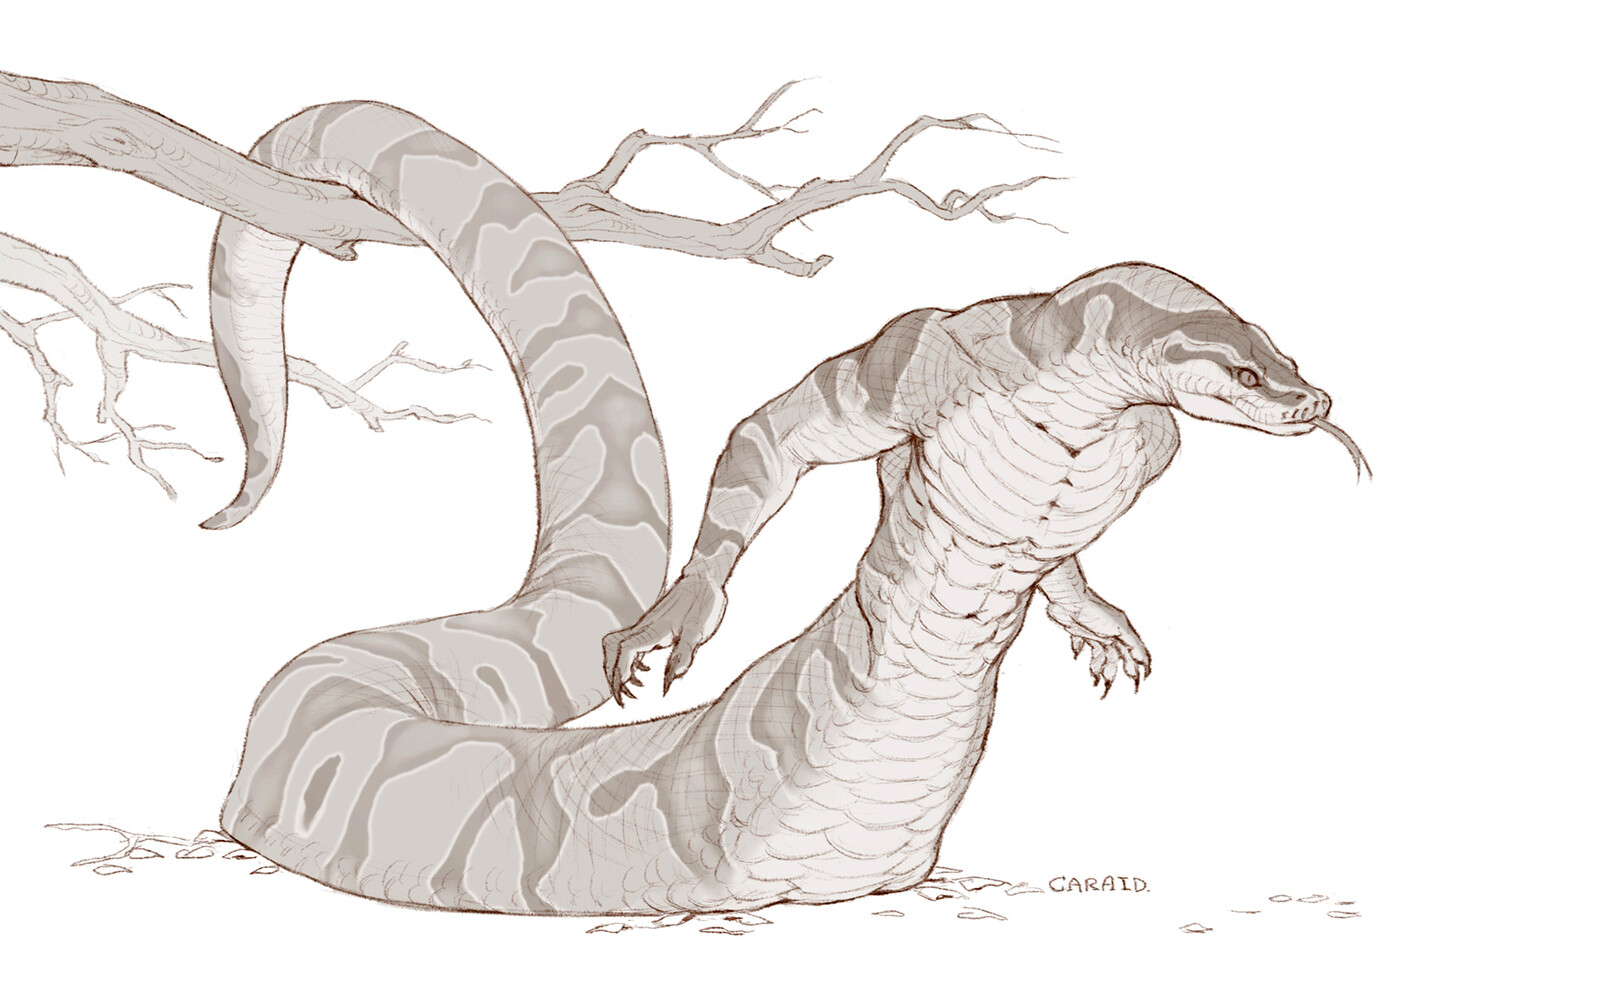 Day 14: Slither